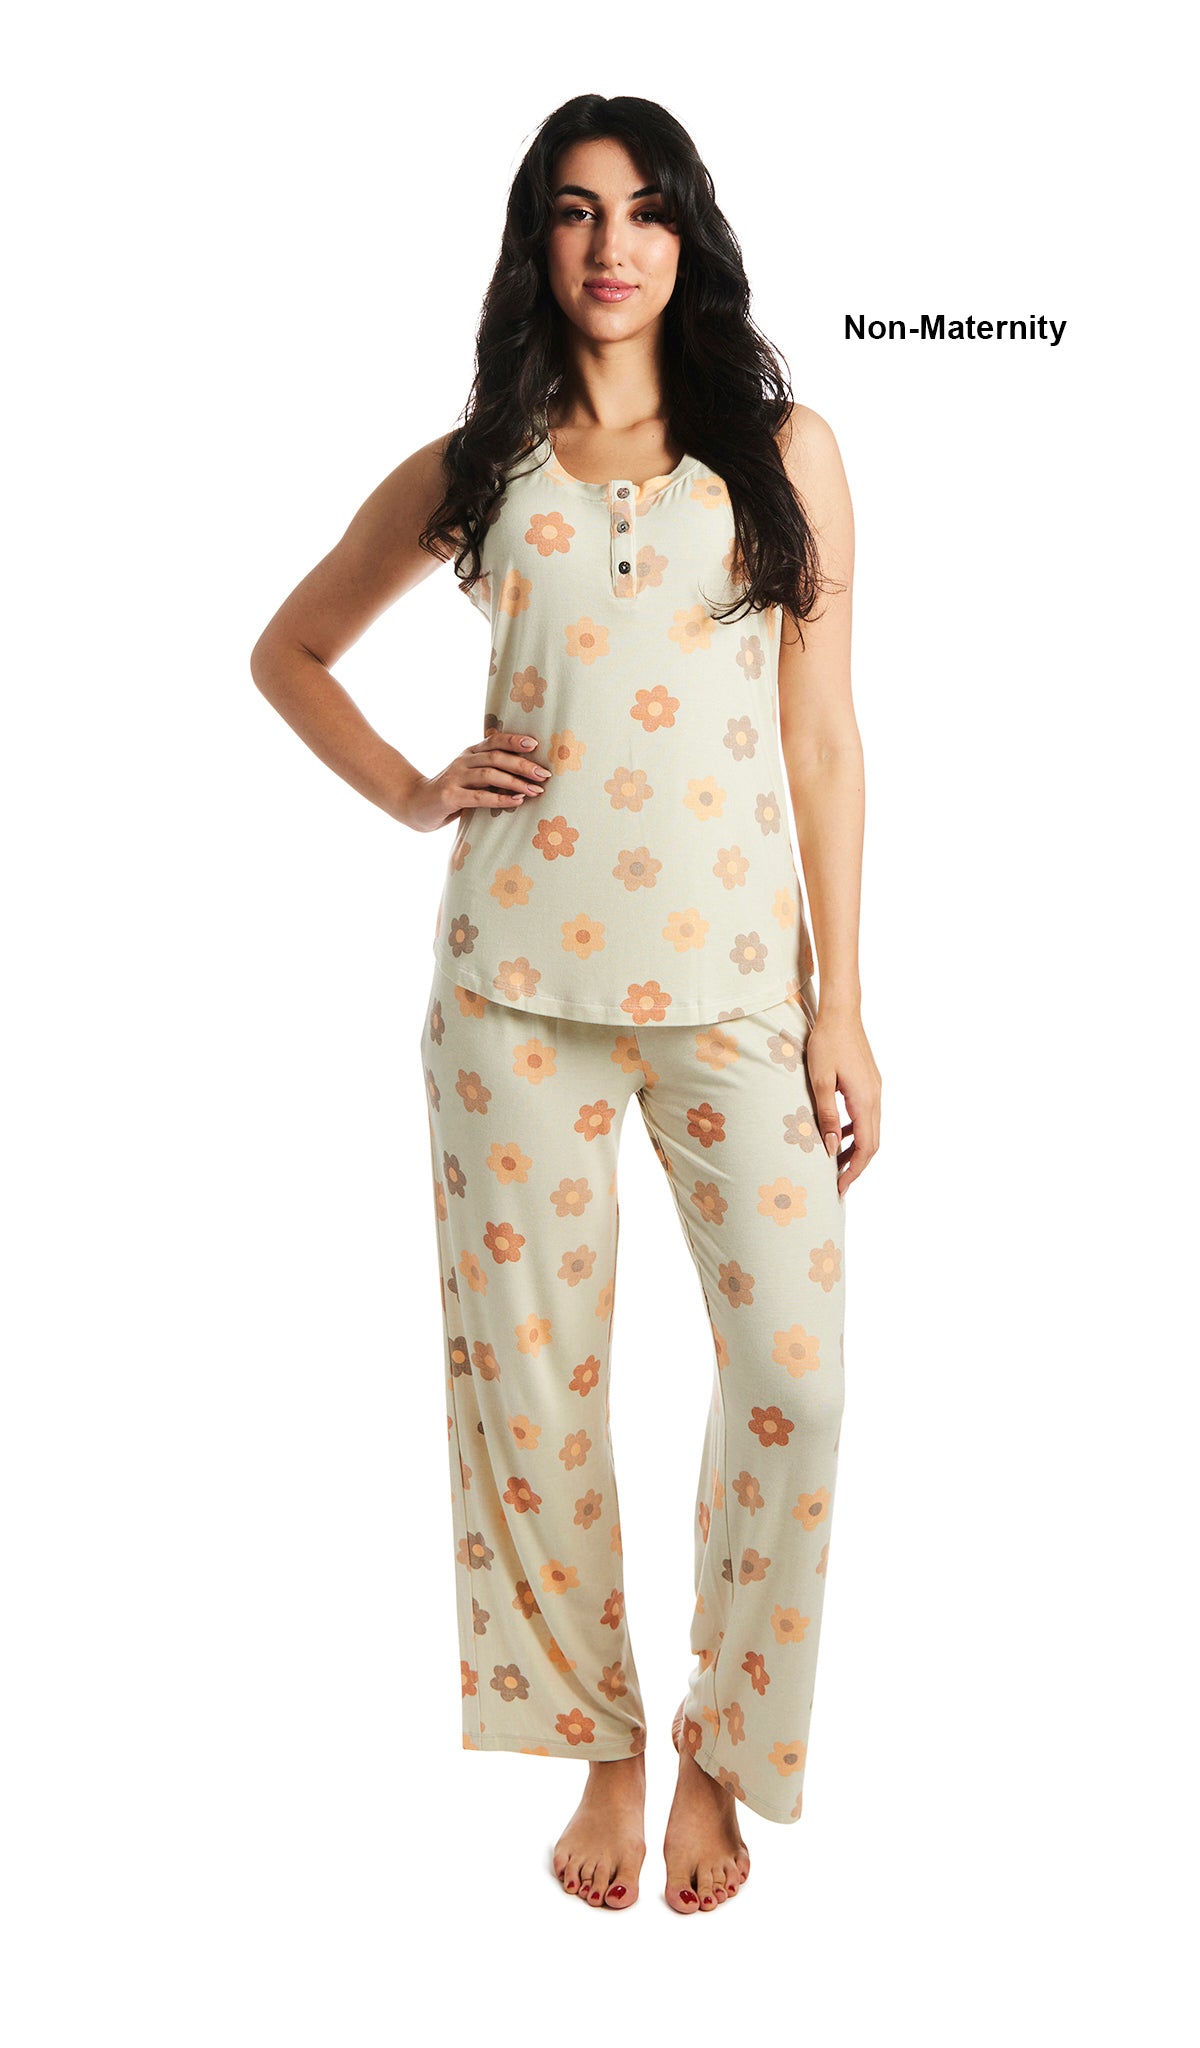 Daisies Joy 2-Piece Set. Woman wearing button front placket tank top and pant as non-maternity with one hand resting on hip.